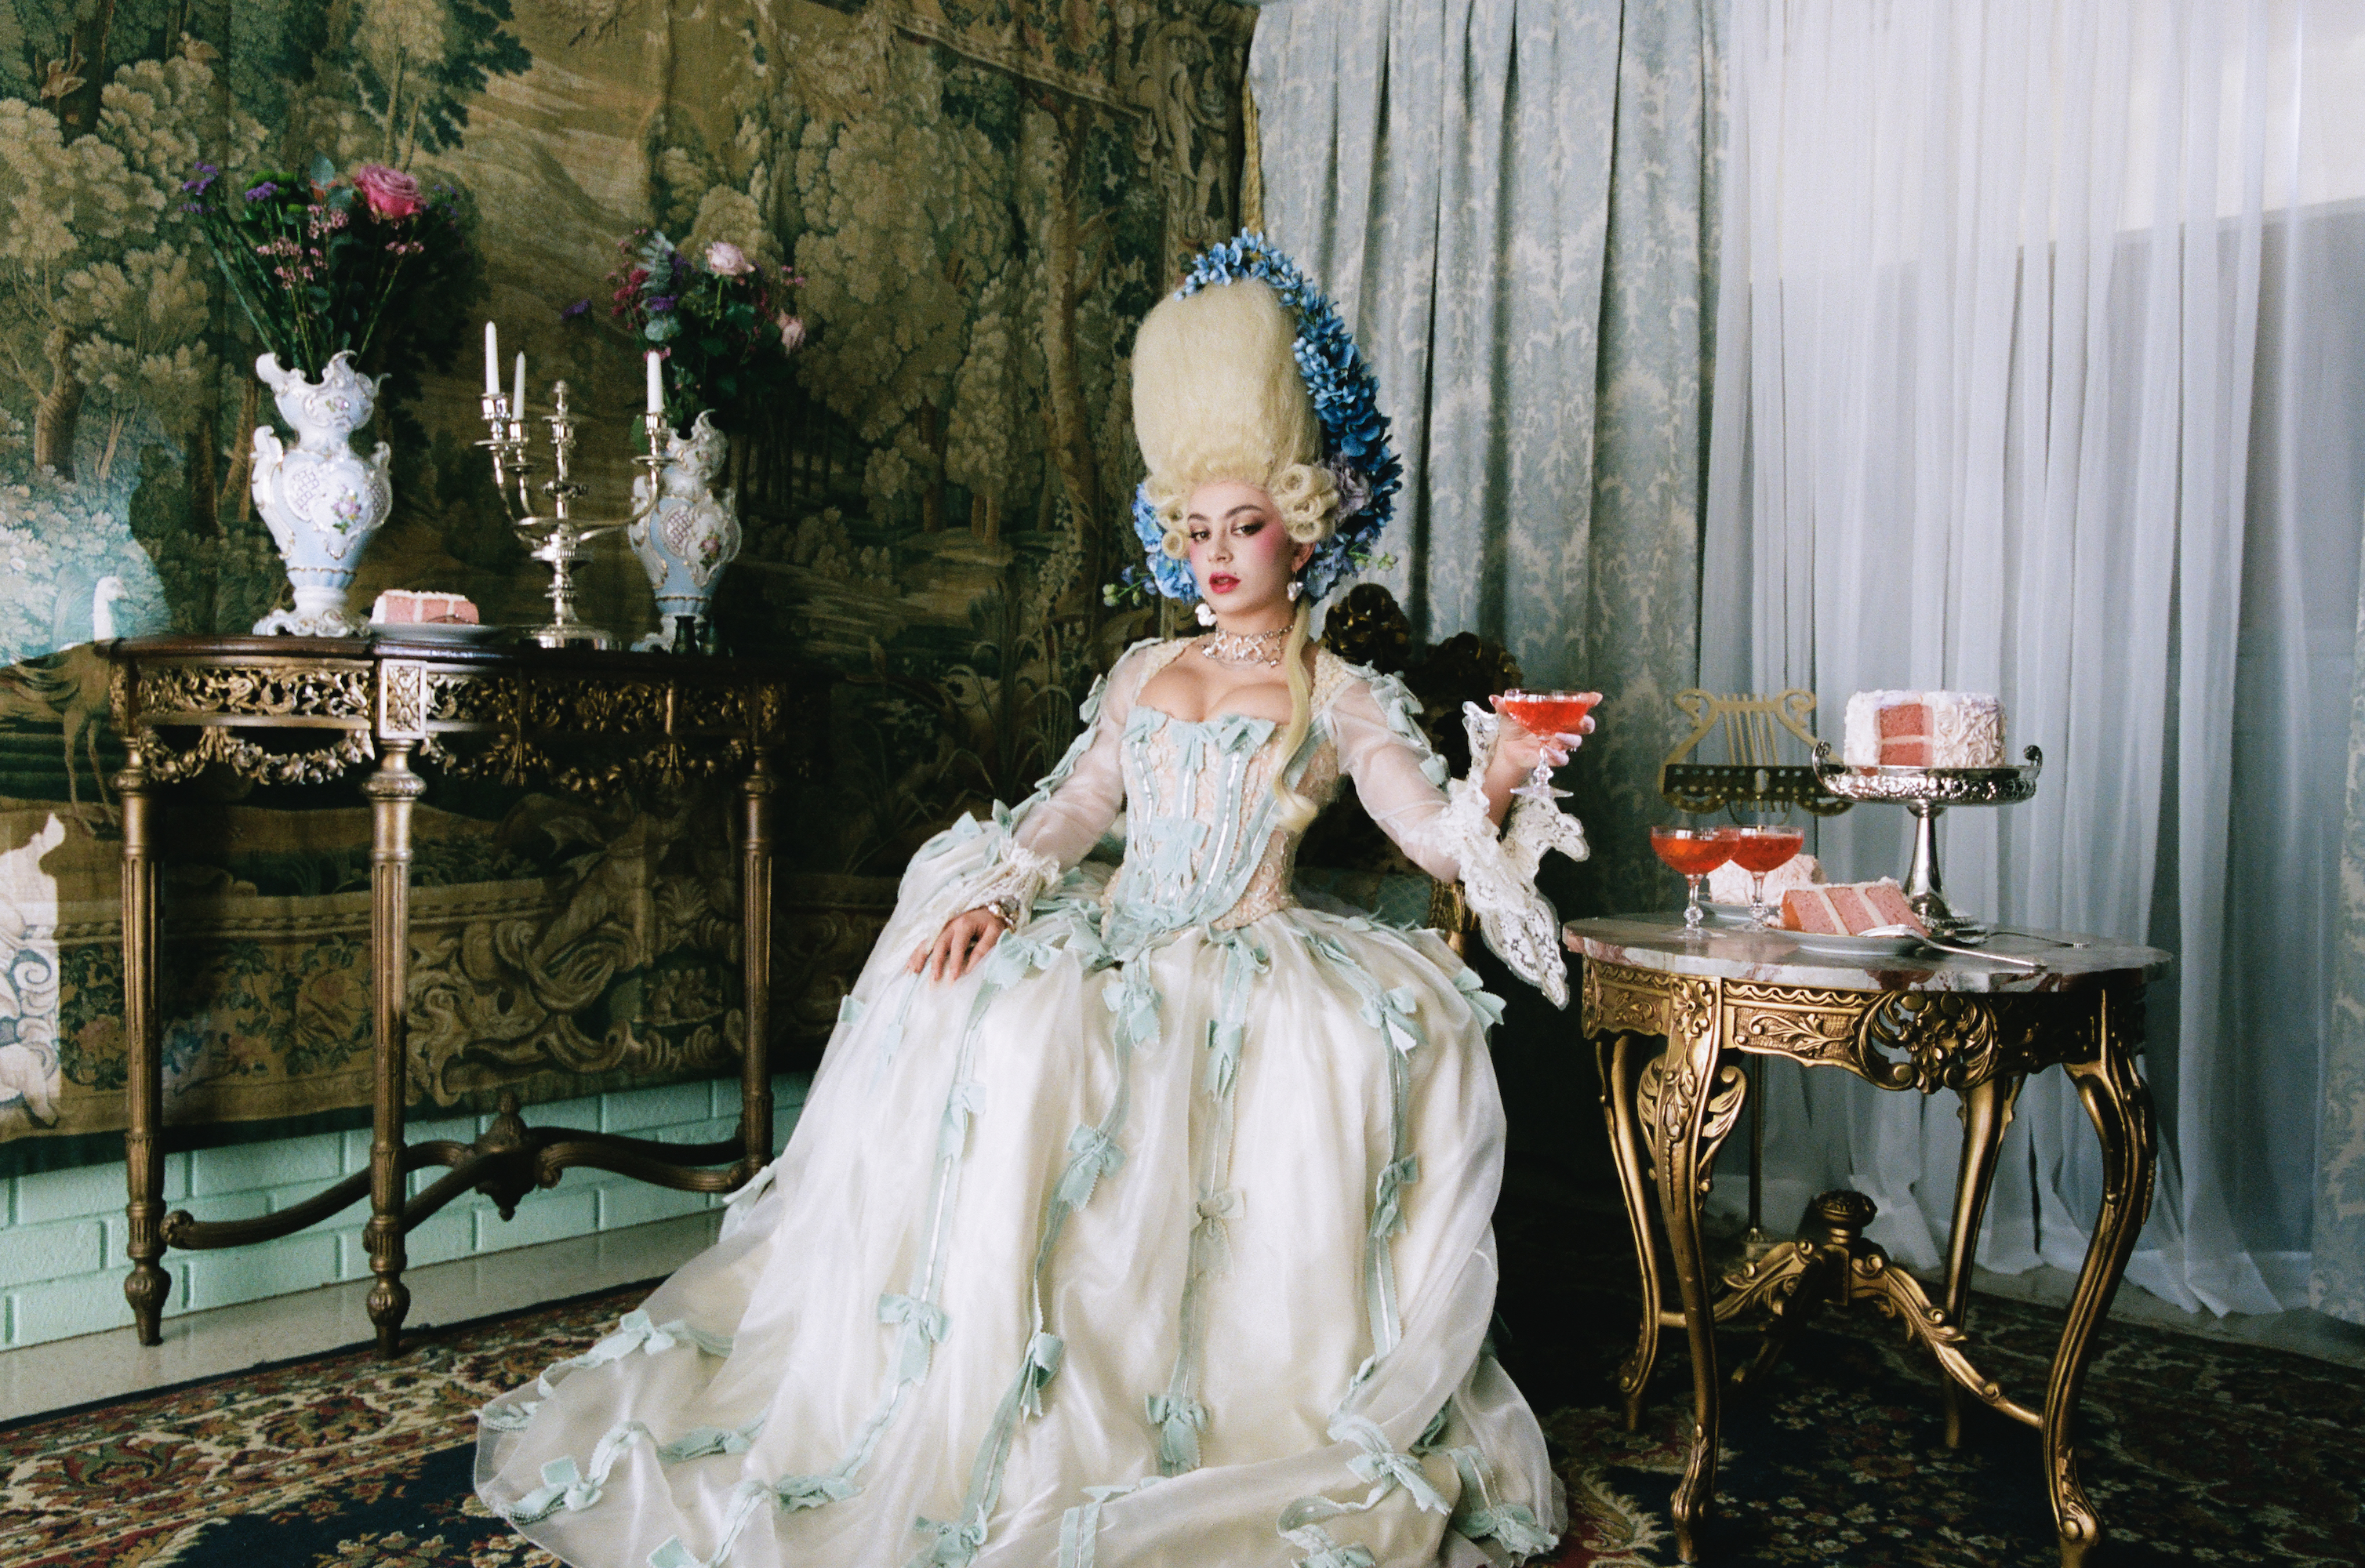 Charli XCX in a Marie Antoinette outfit in the Used To Know Me music video